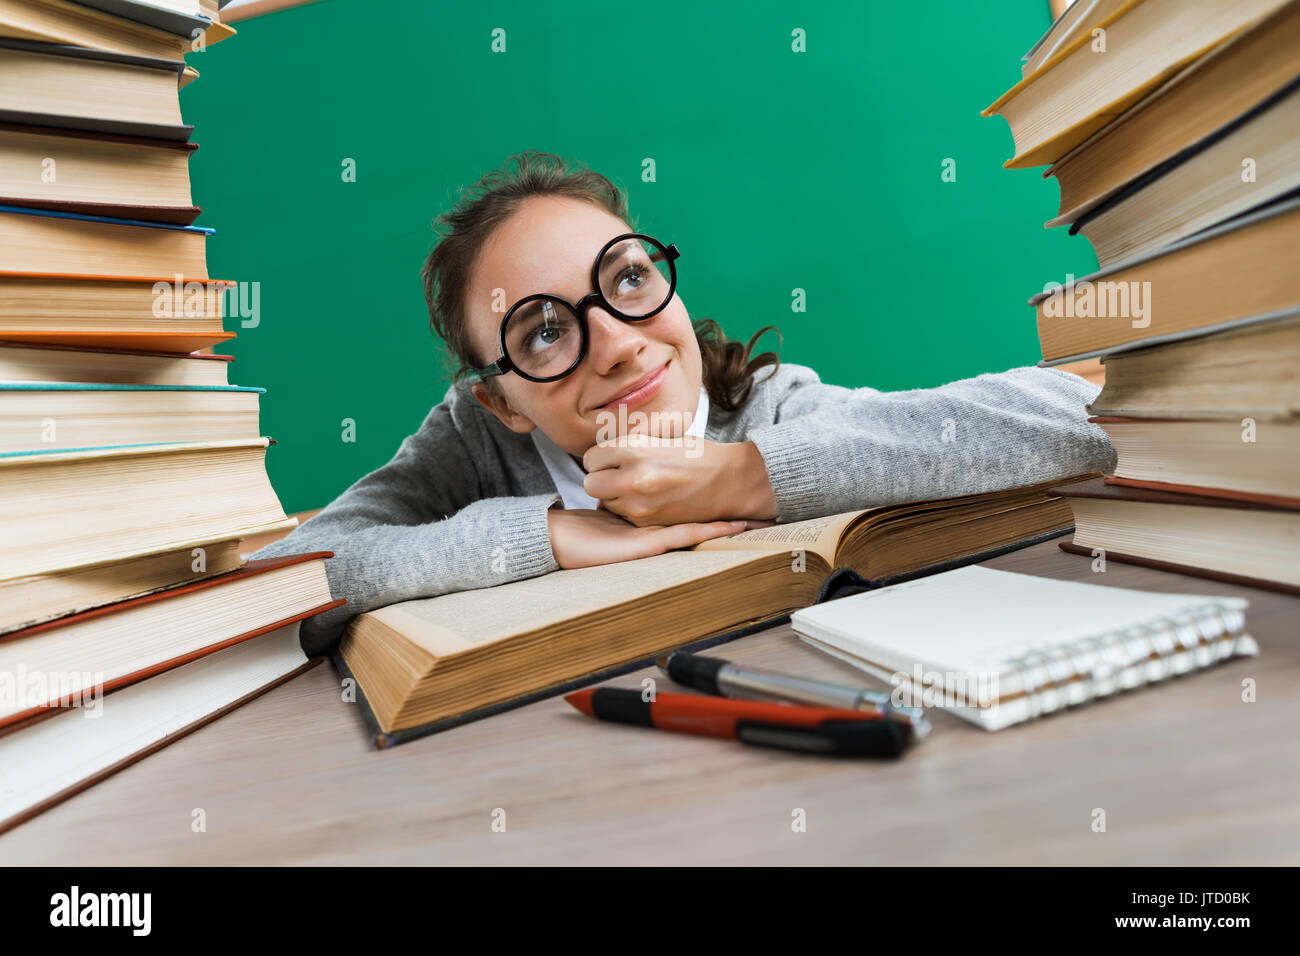 Student dreaming or thinking of something pleasant while sitting at the desk with open book. Education concept Stock Photo